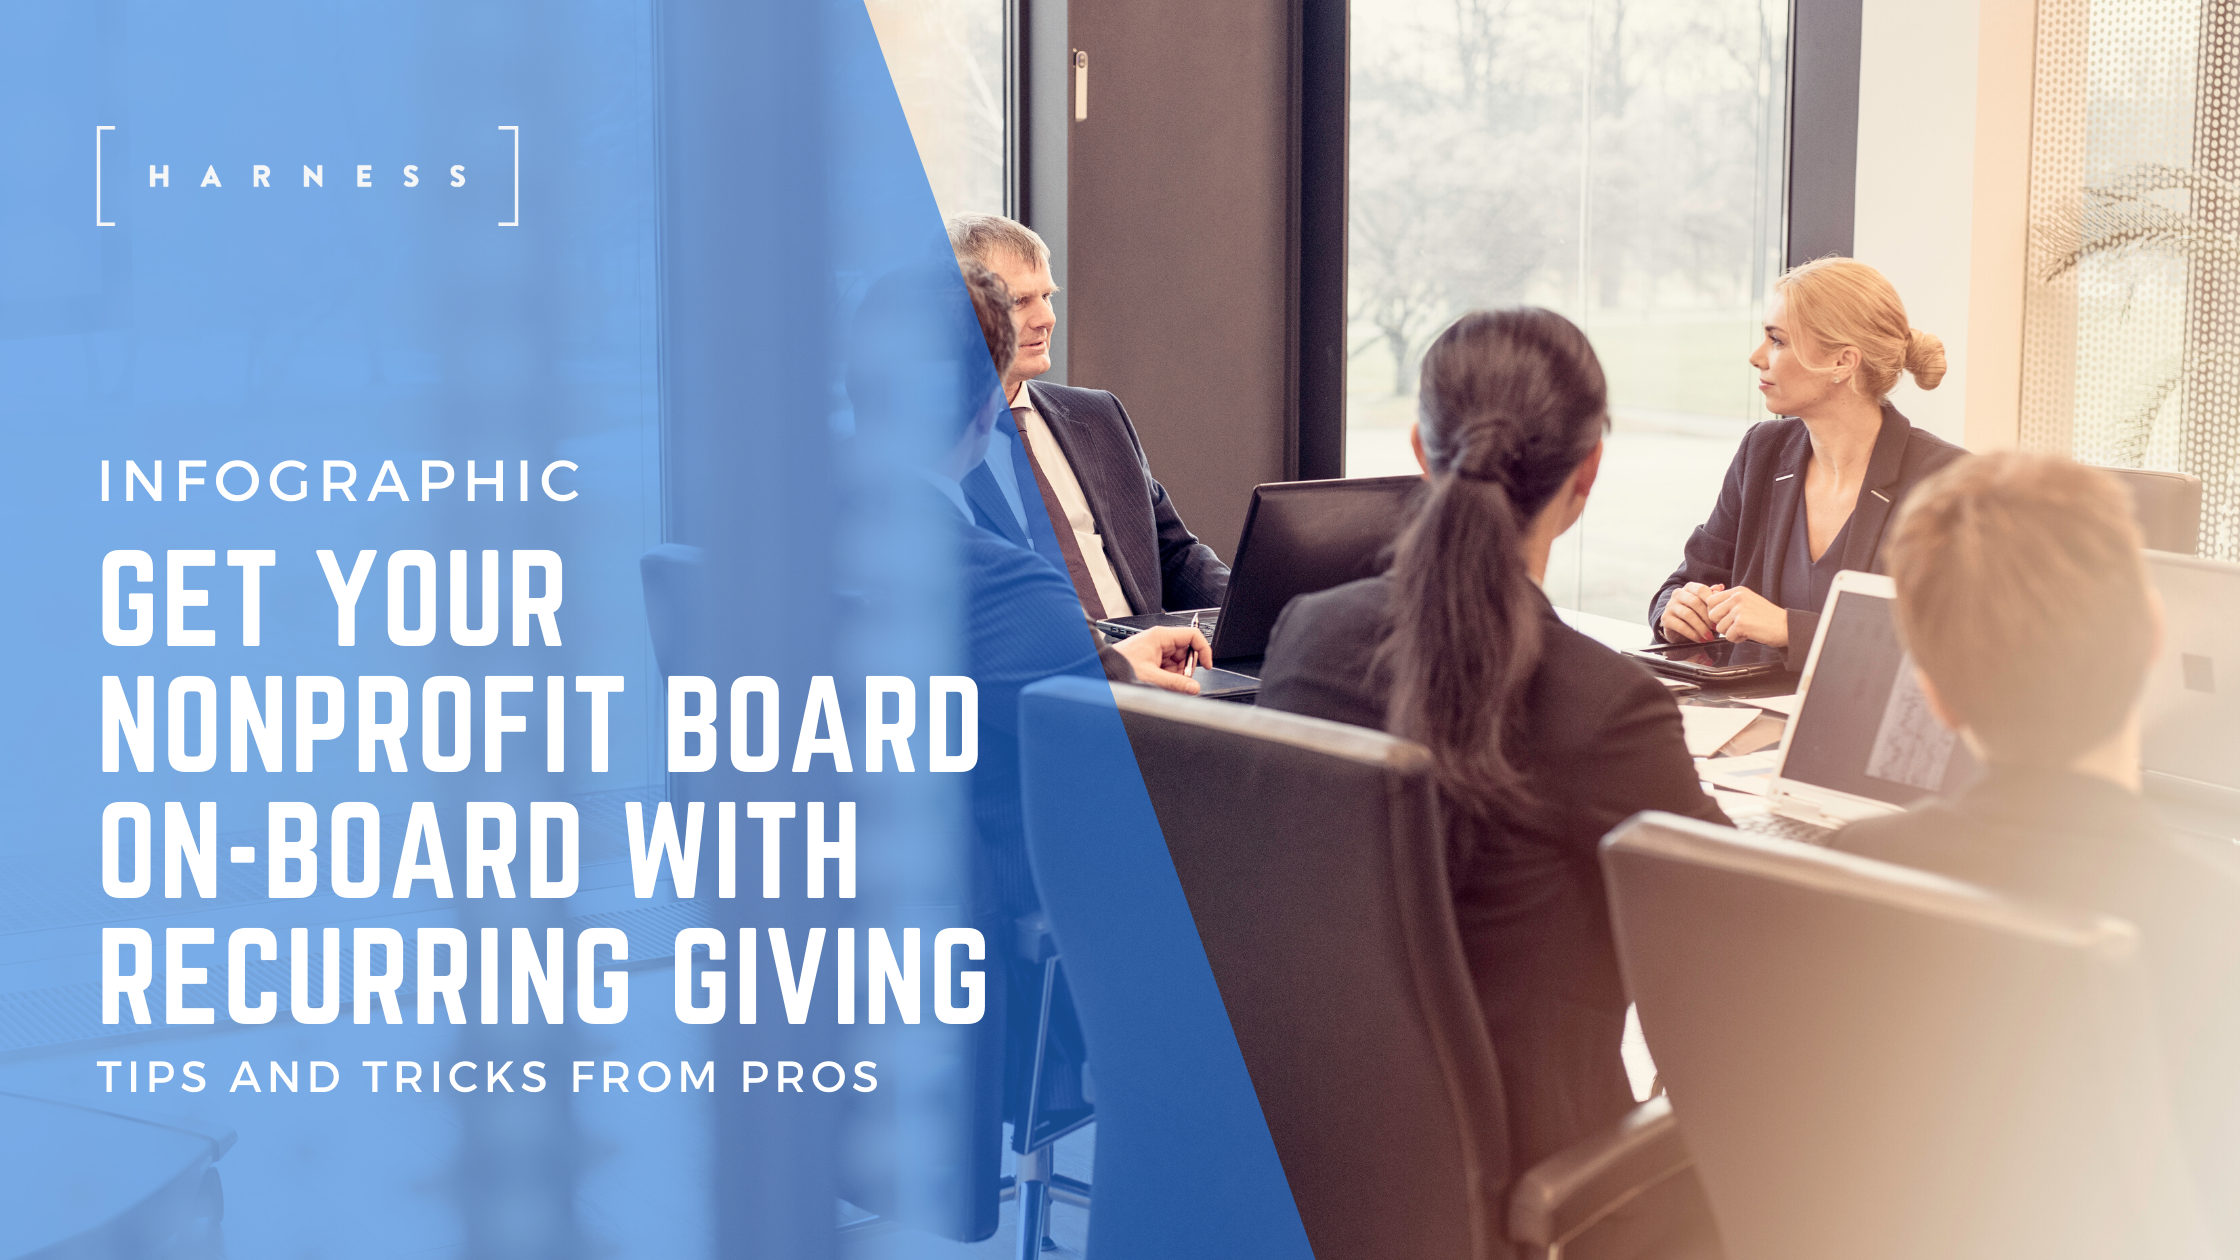 Get Your Nonprofit Board on Board with Recurring Giving [Infographic]